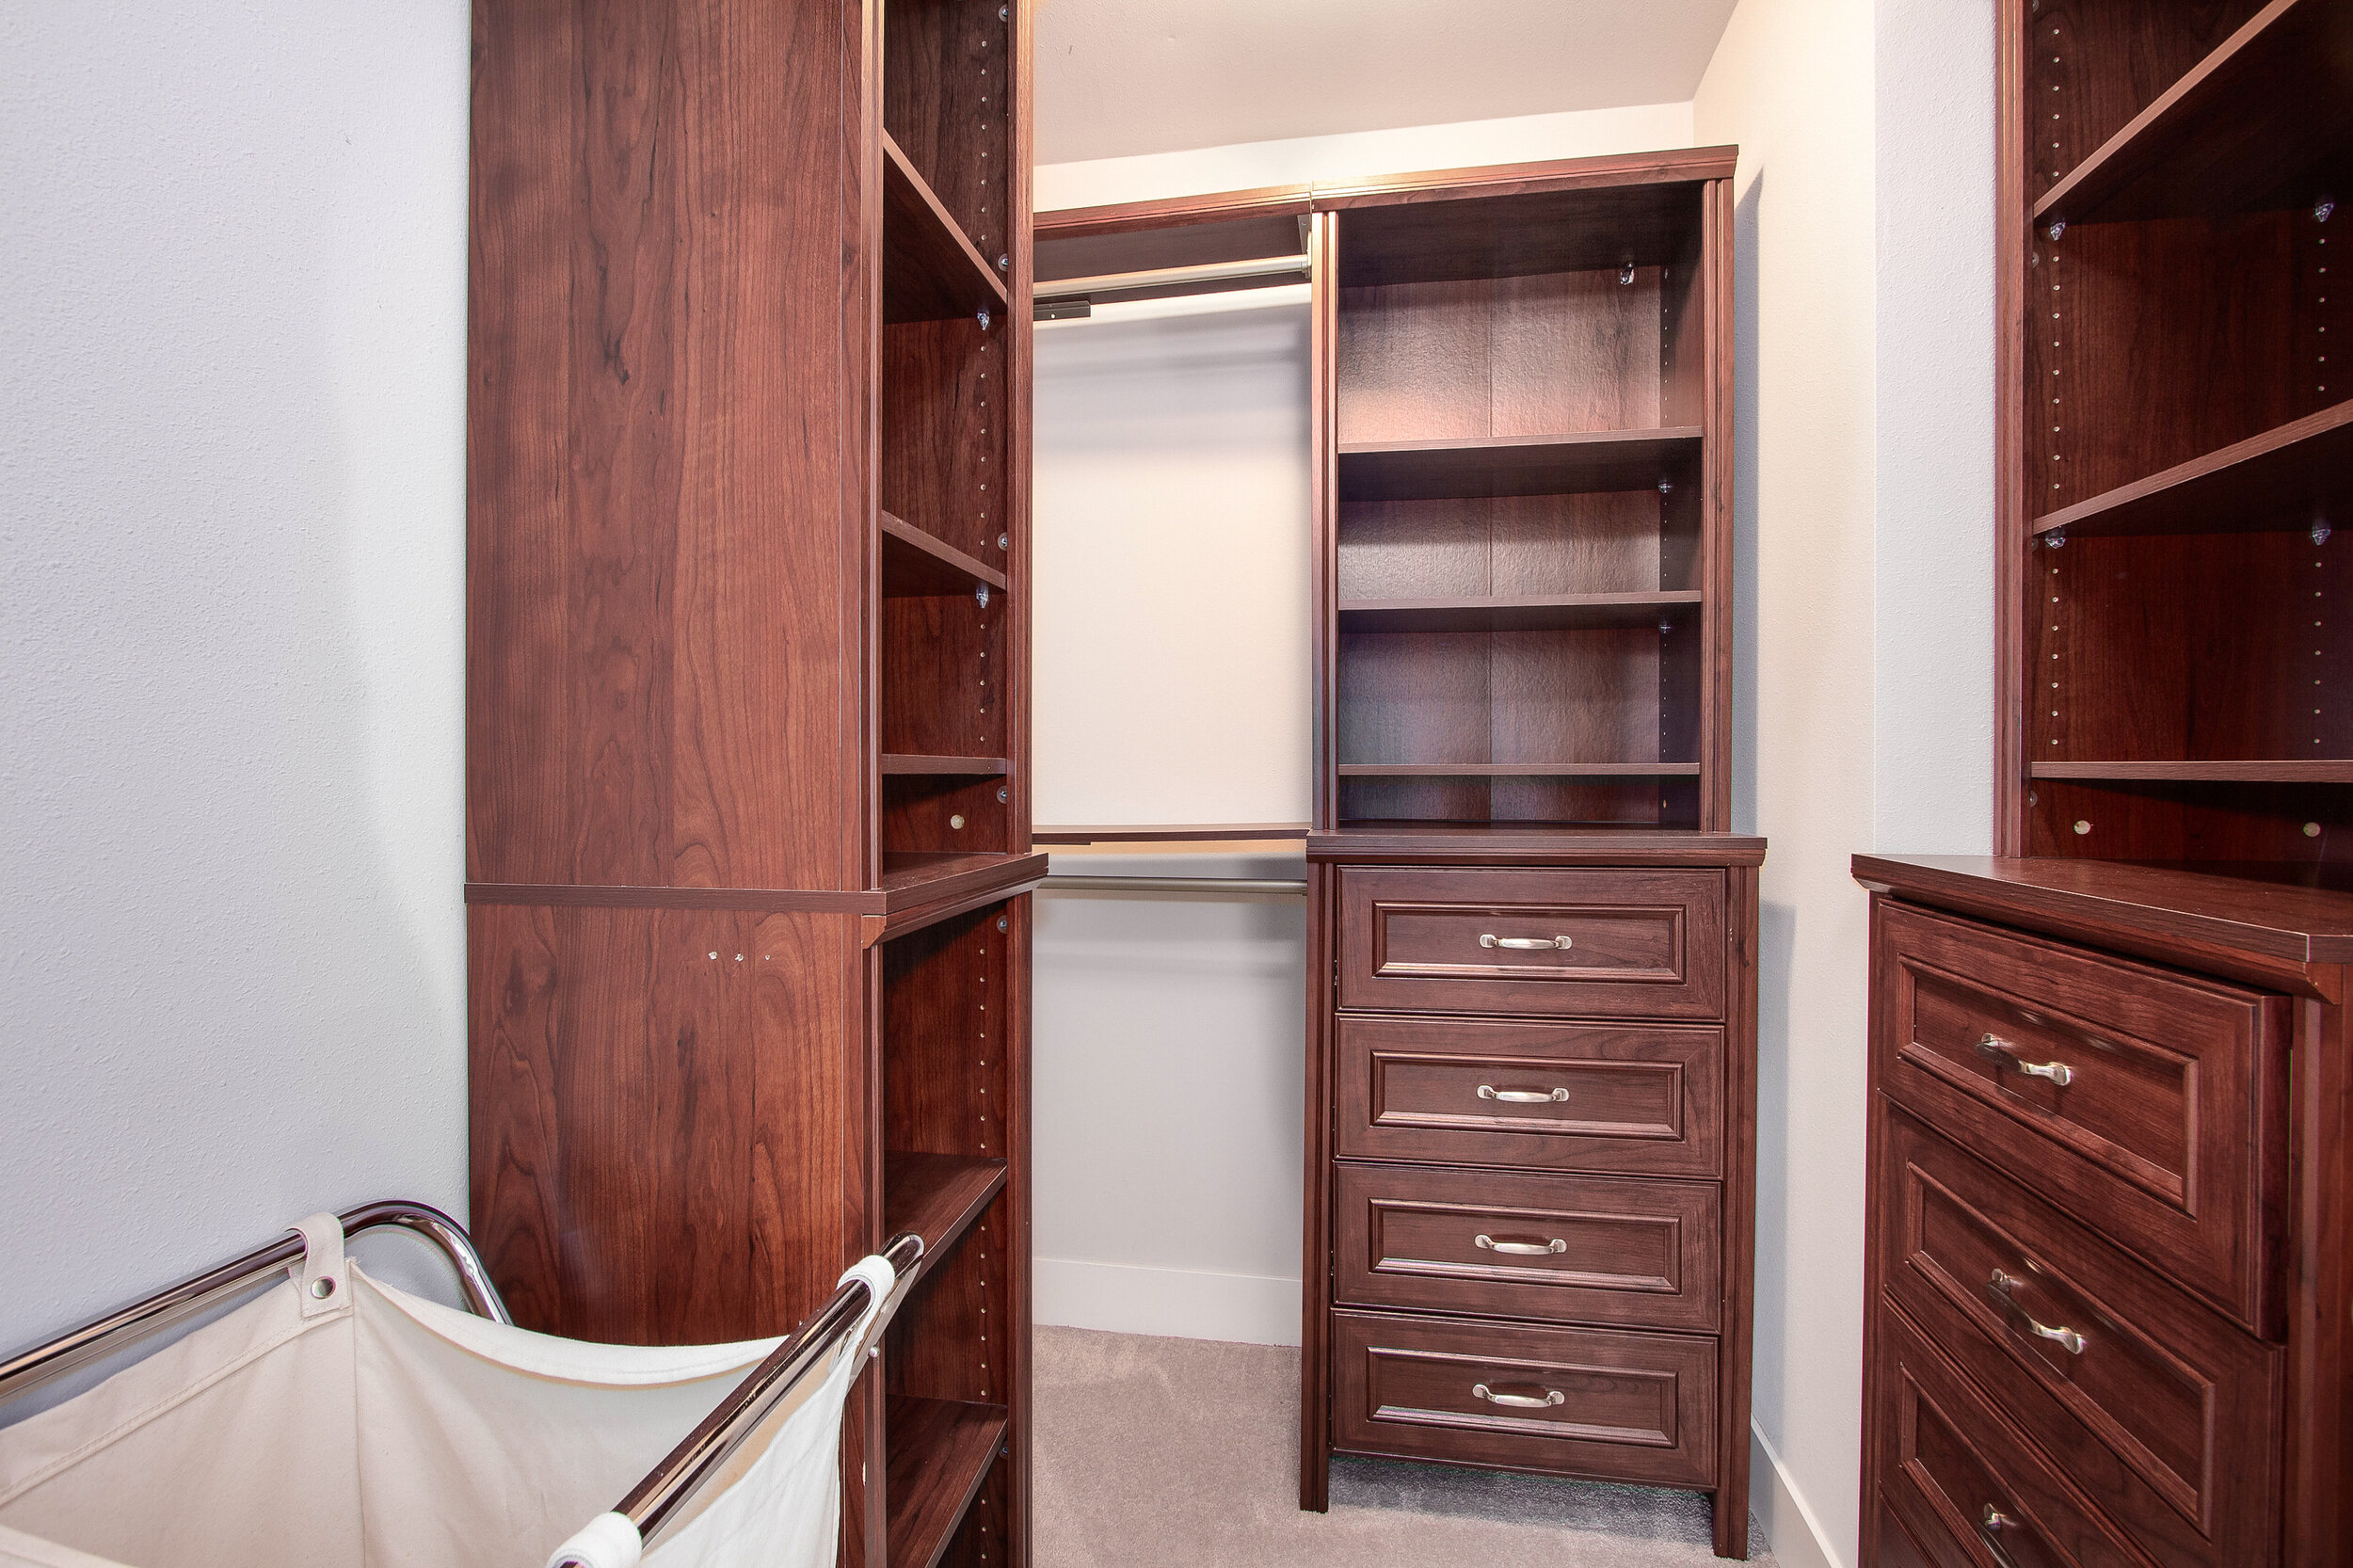  The master is complete with a walk-in closet with ample built-in storage space.&nbsp; 